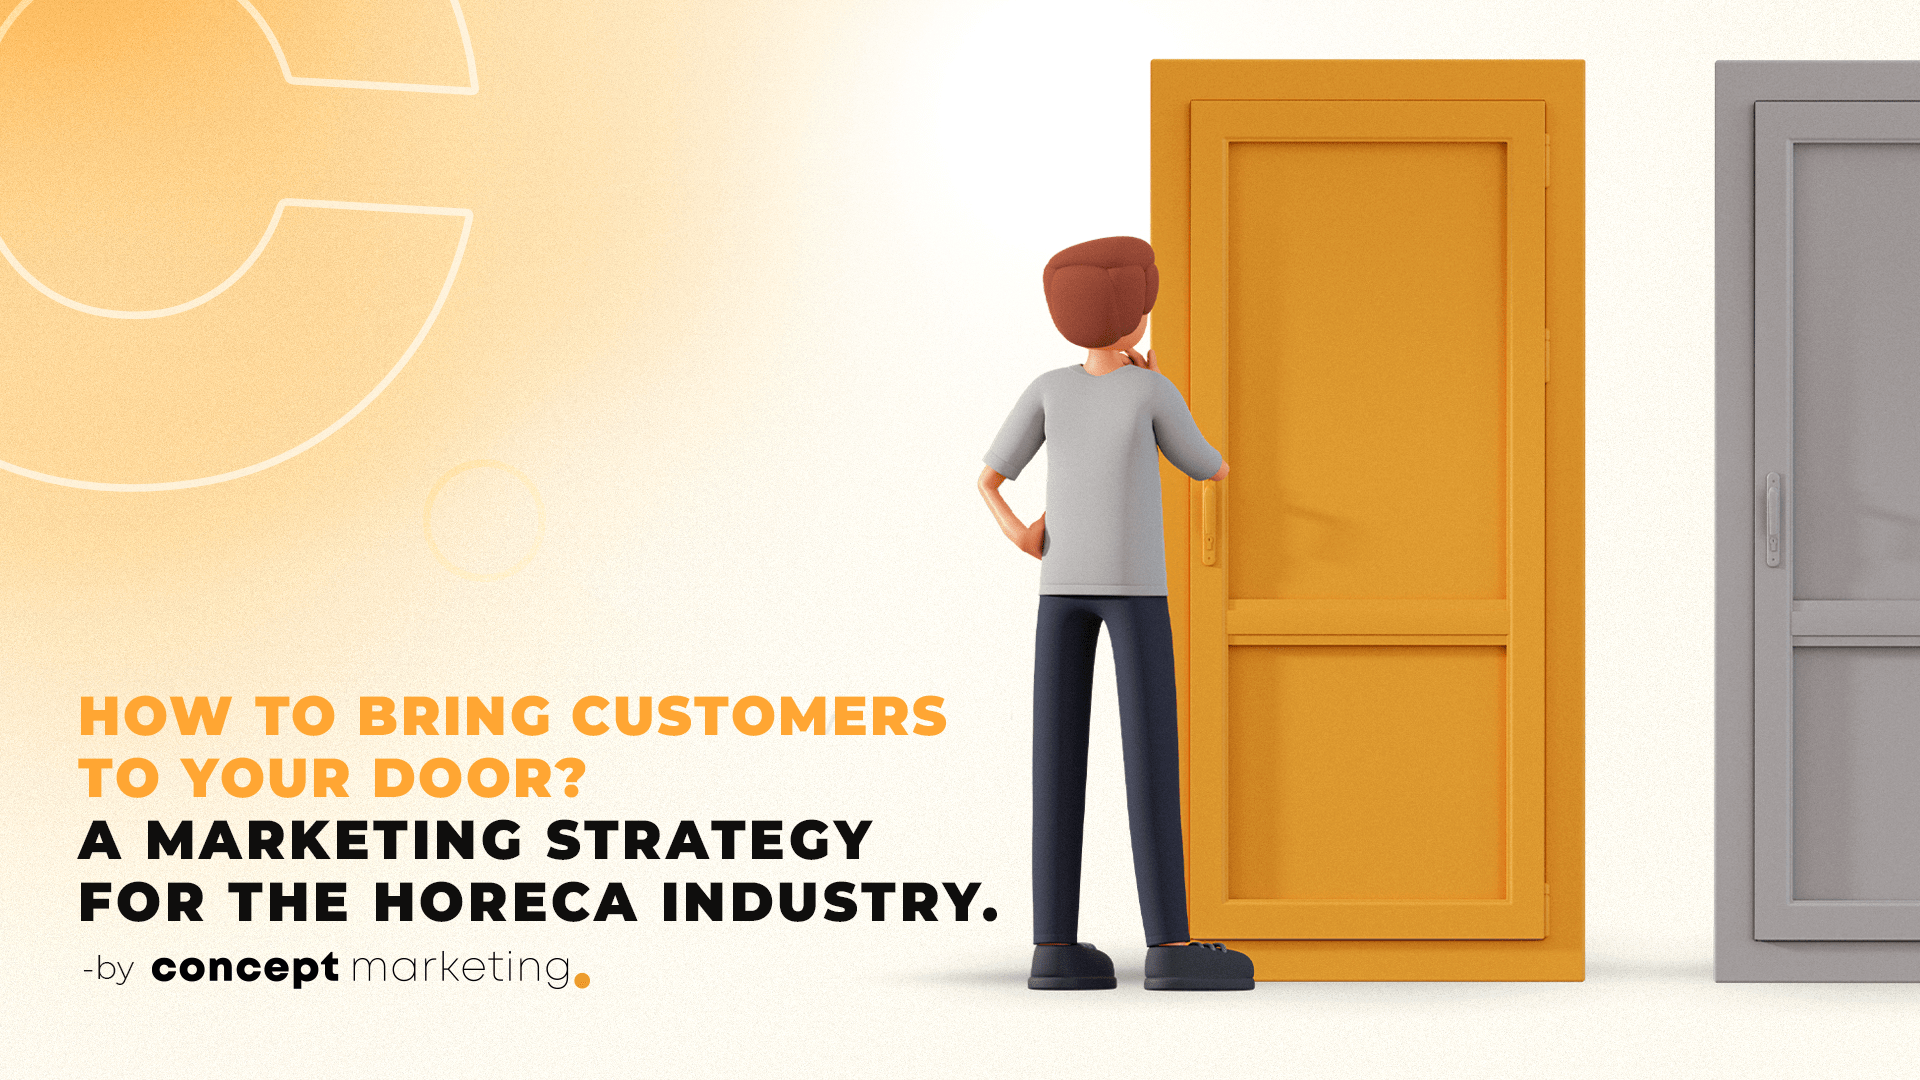 How to bring customers to your door? A marketing strategy for the HoReCa industry.